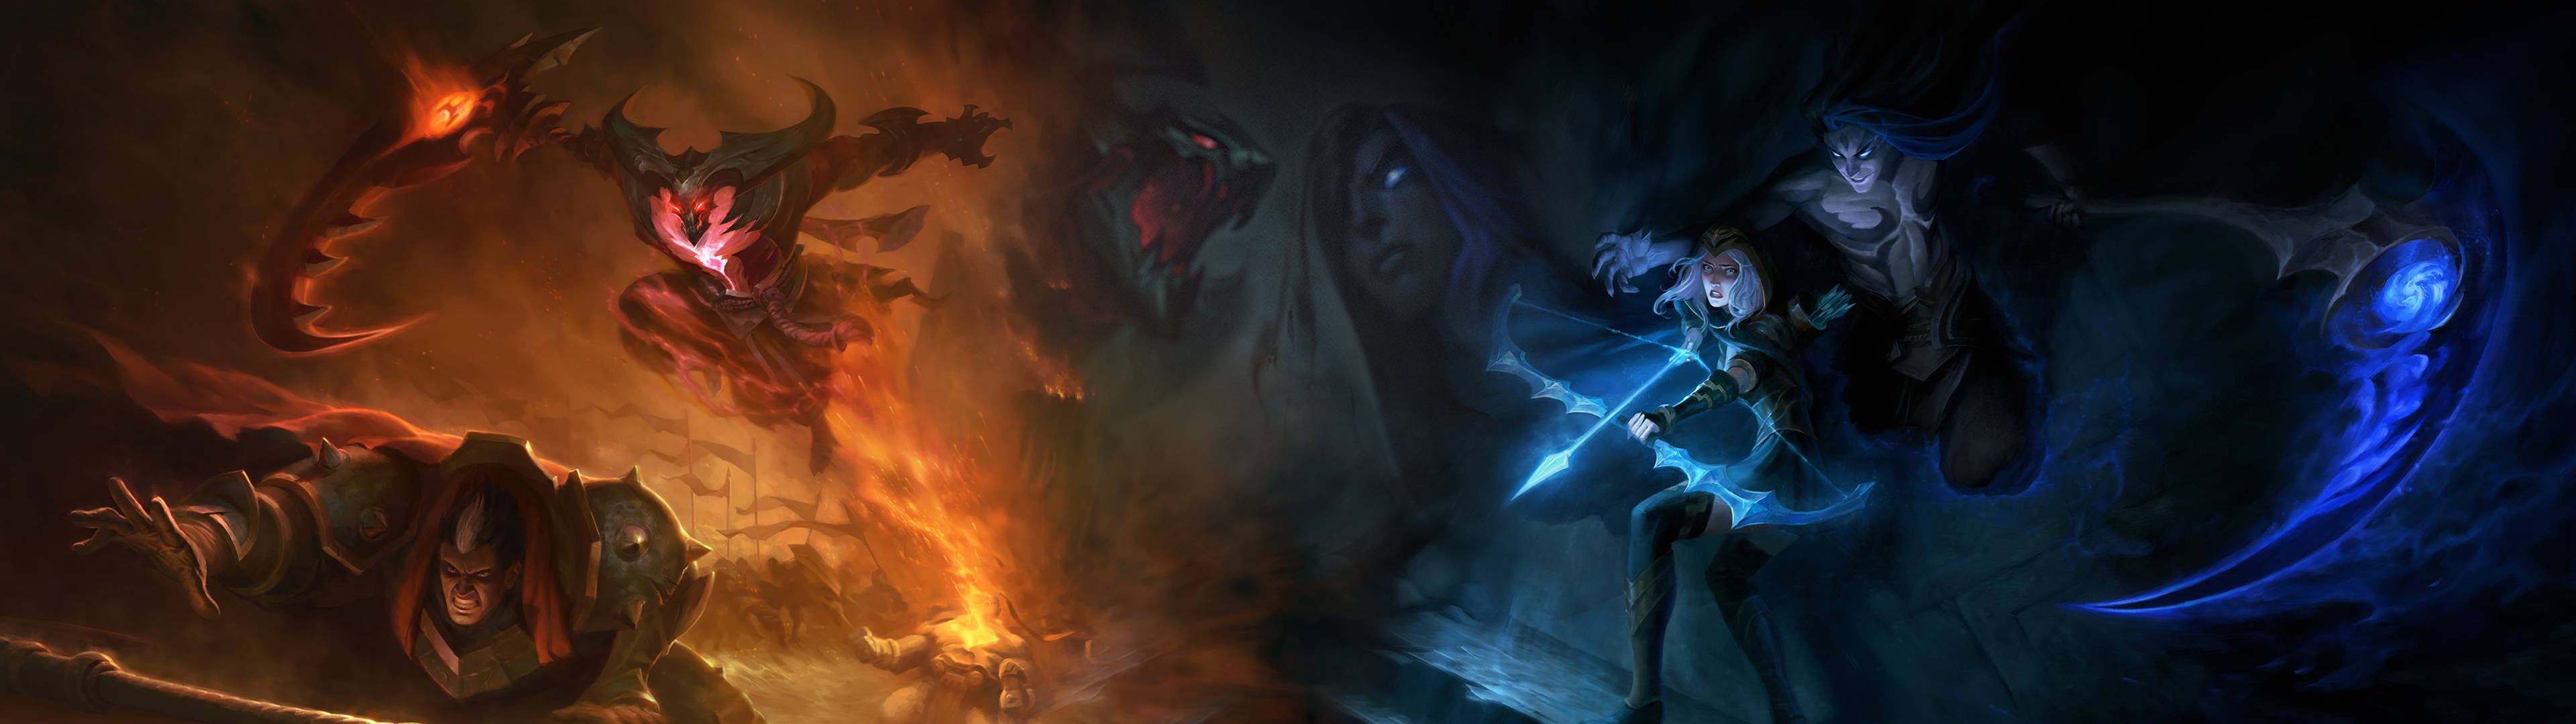 Unlock New Possibilities In The World Of League Of Legends